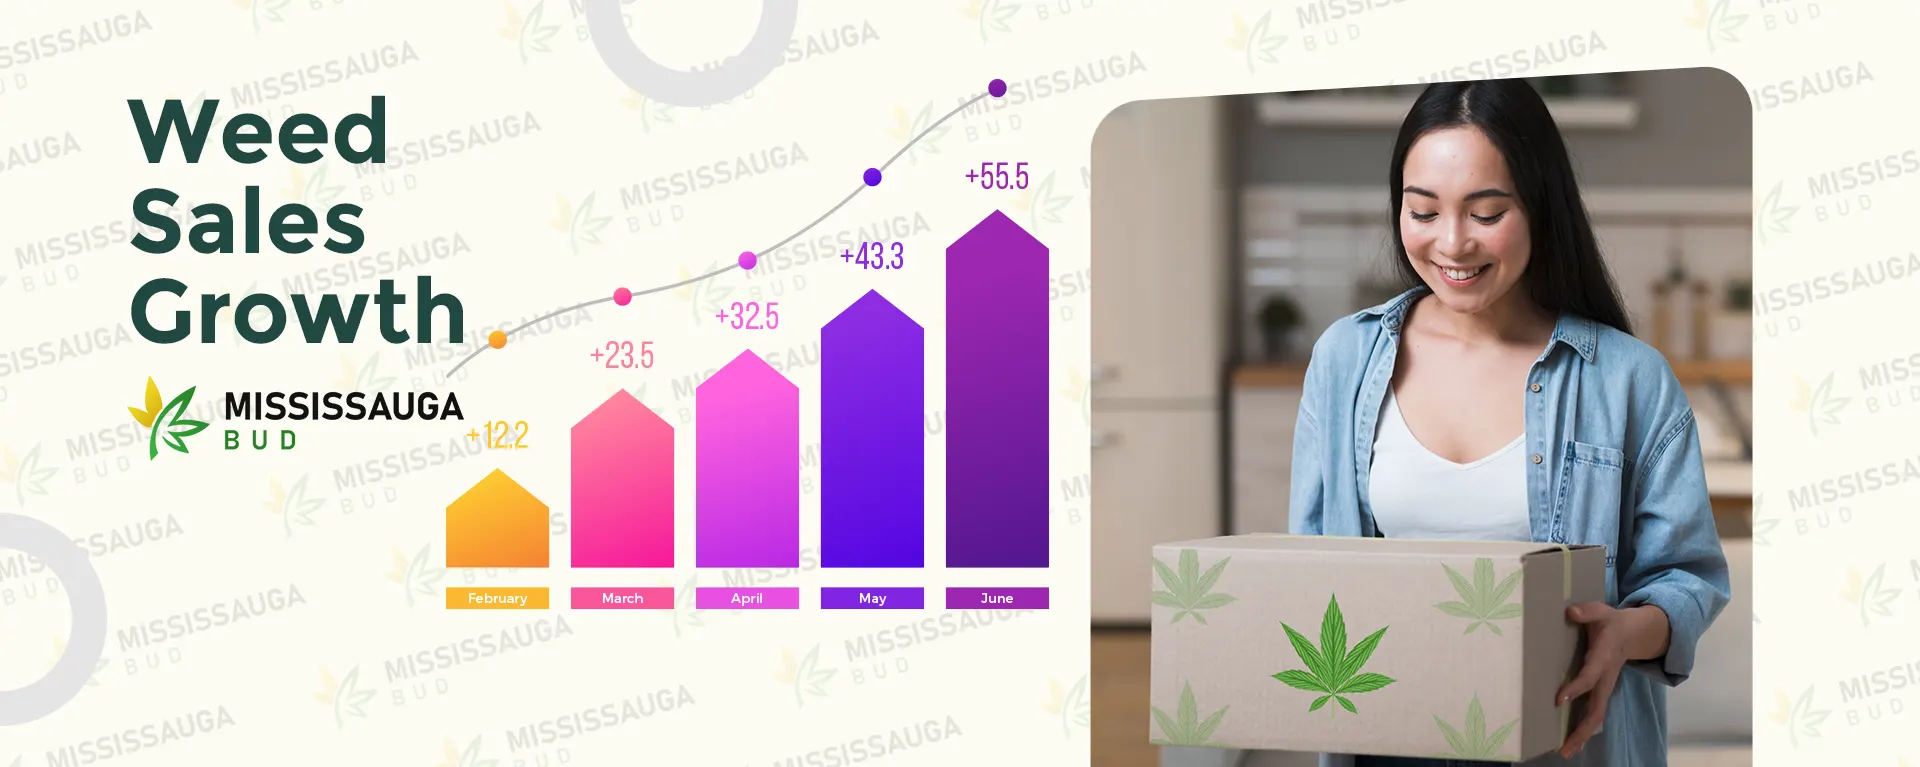 Mississauga Weed Delivery Services See Growth Amidst Increased Focus and Online Learning